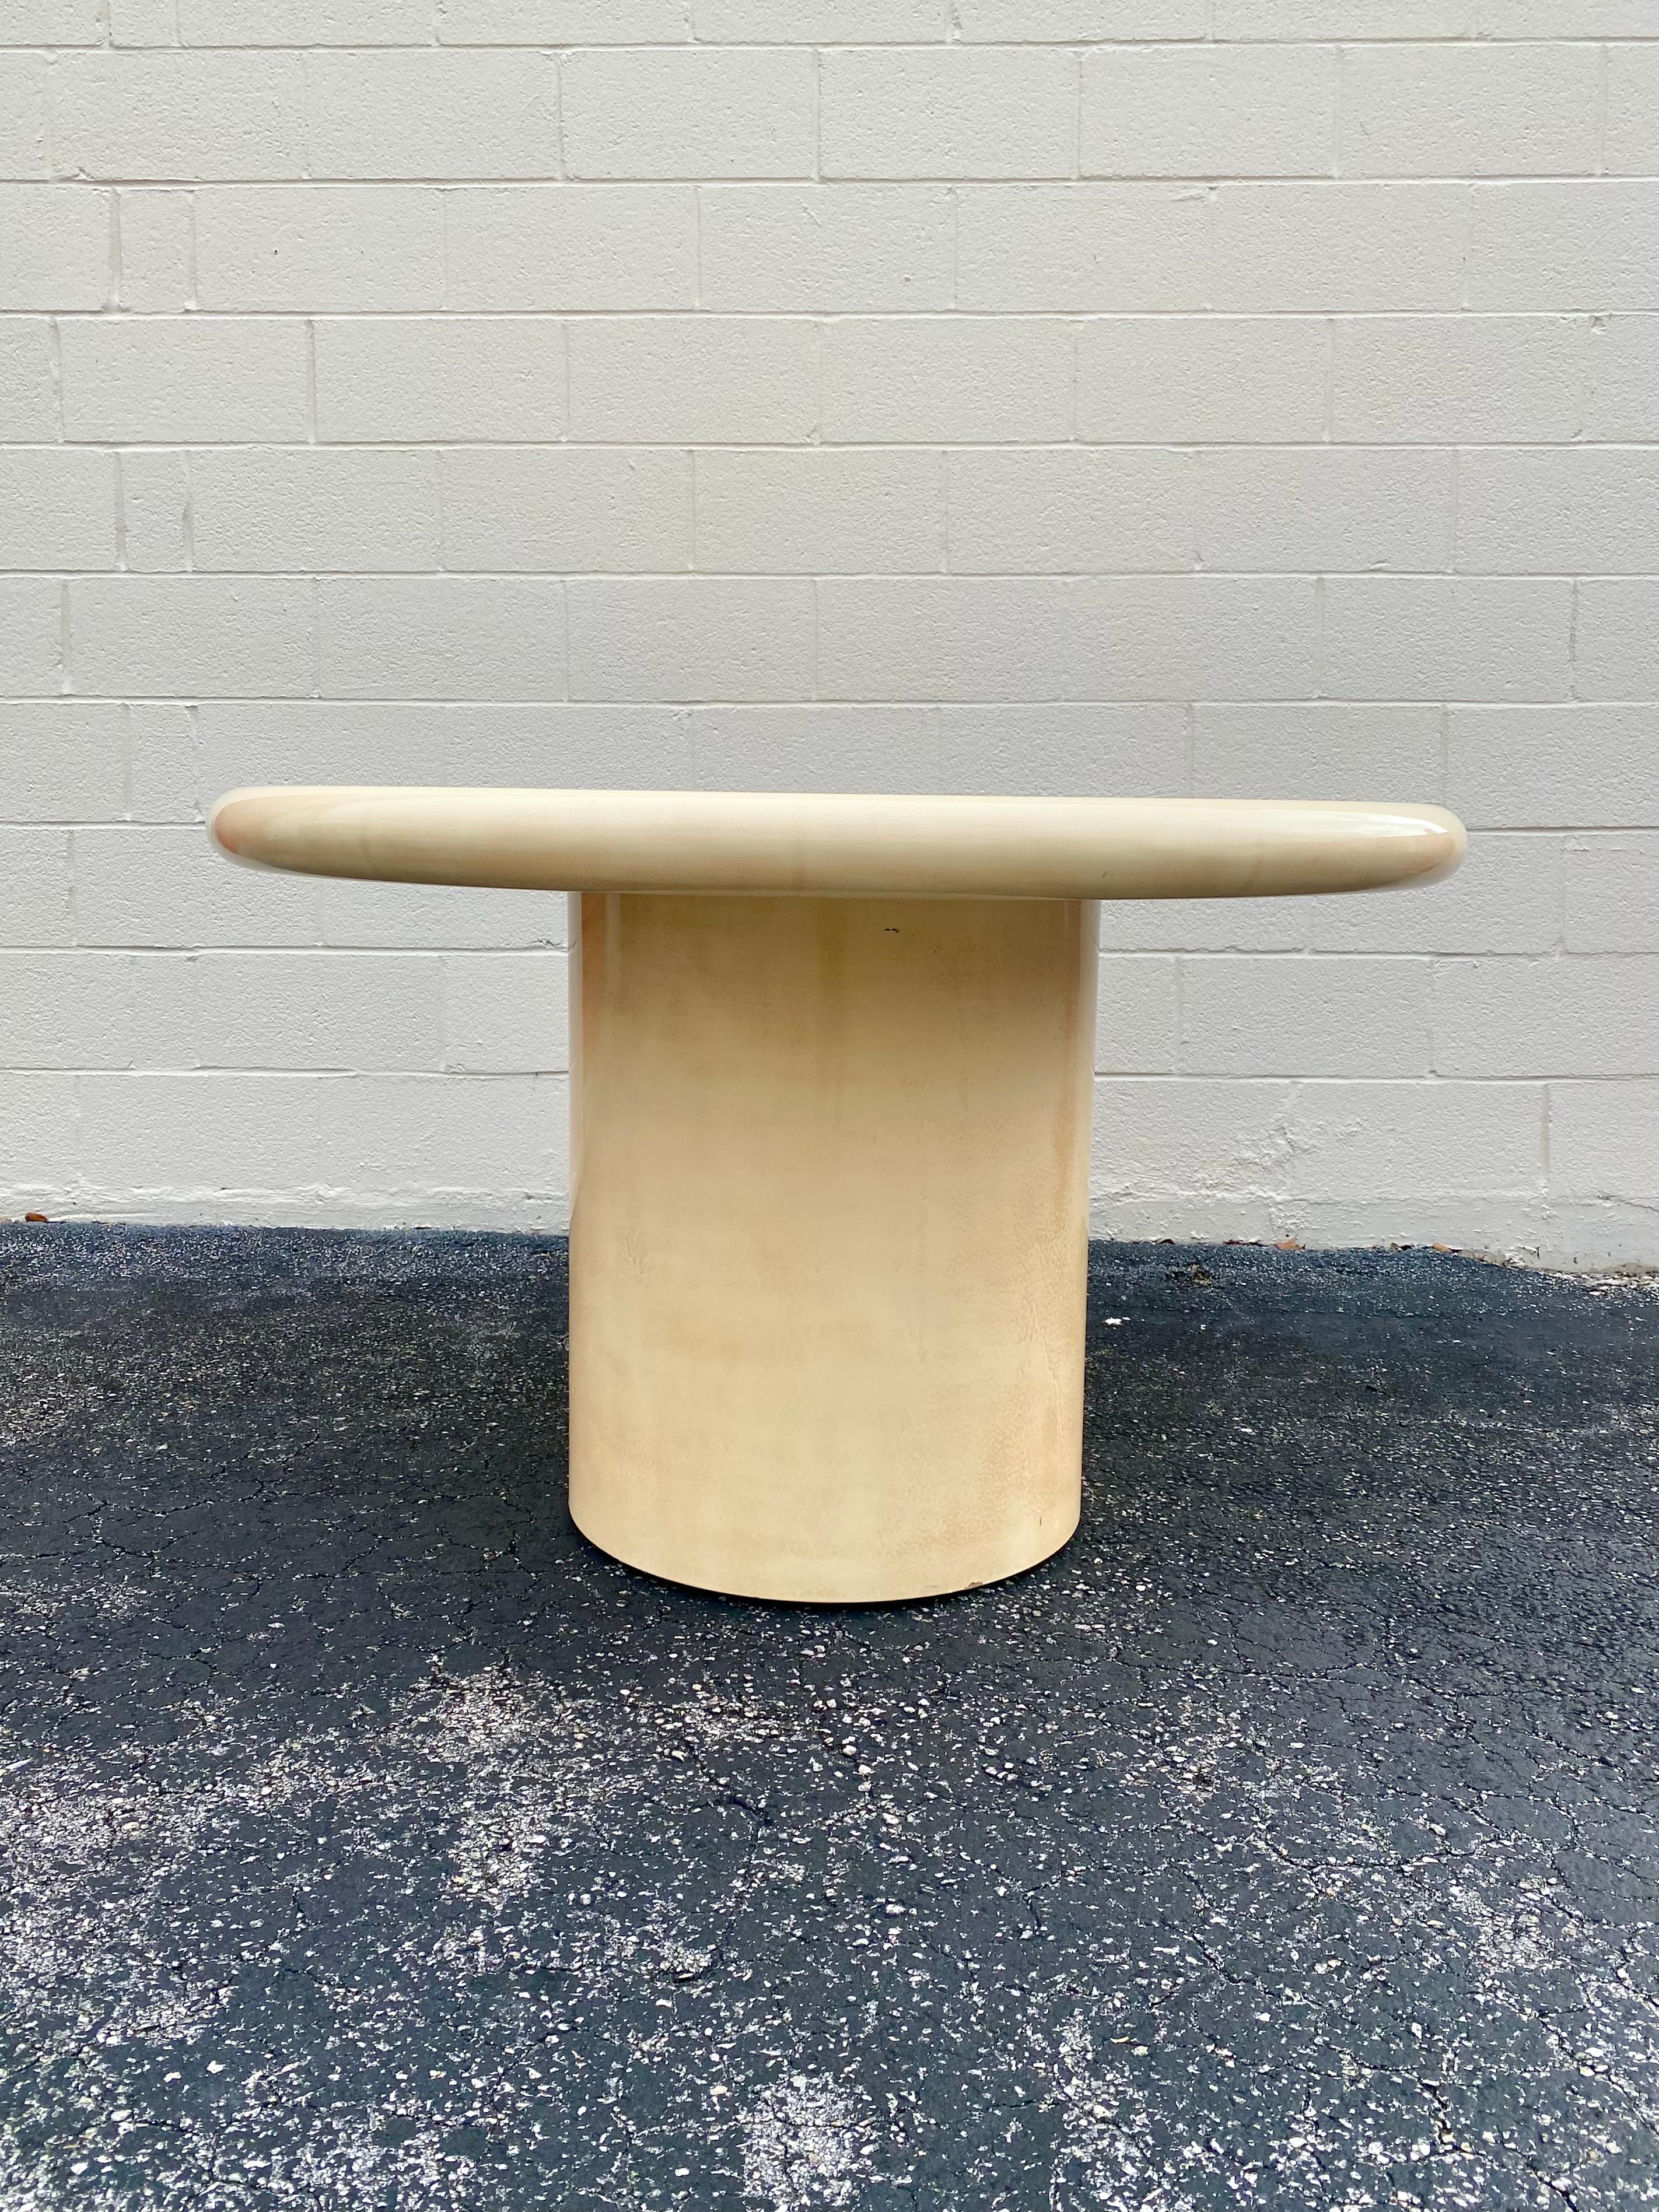 On offer on this occasion is one of the most stunning, Mid Century dining table you could hope to find. This is an ultra-rare opportunity to acquire what is, unequivocally, the best of the best, it being a most spectacular and beautifully-presented.